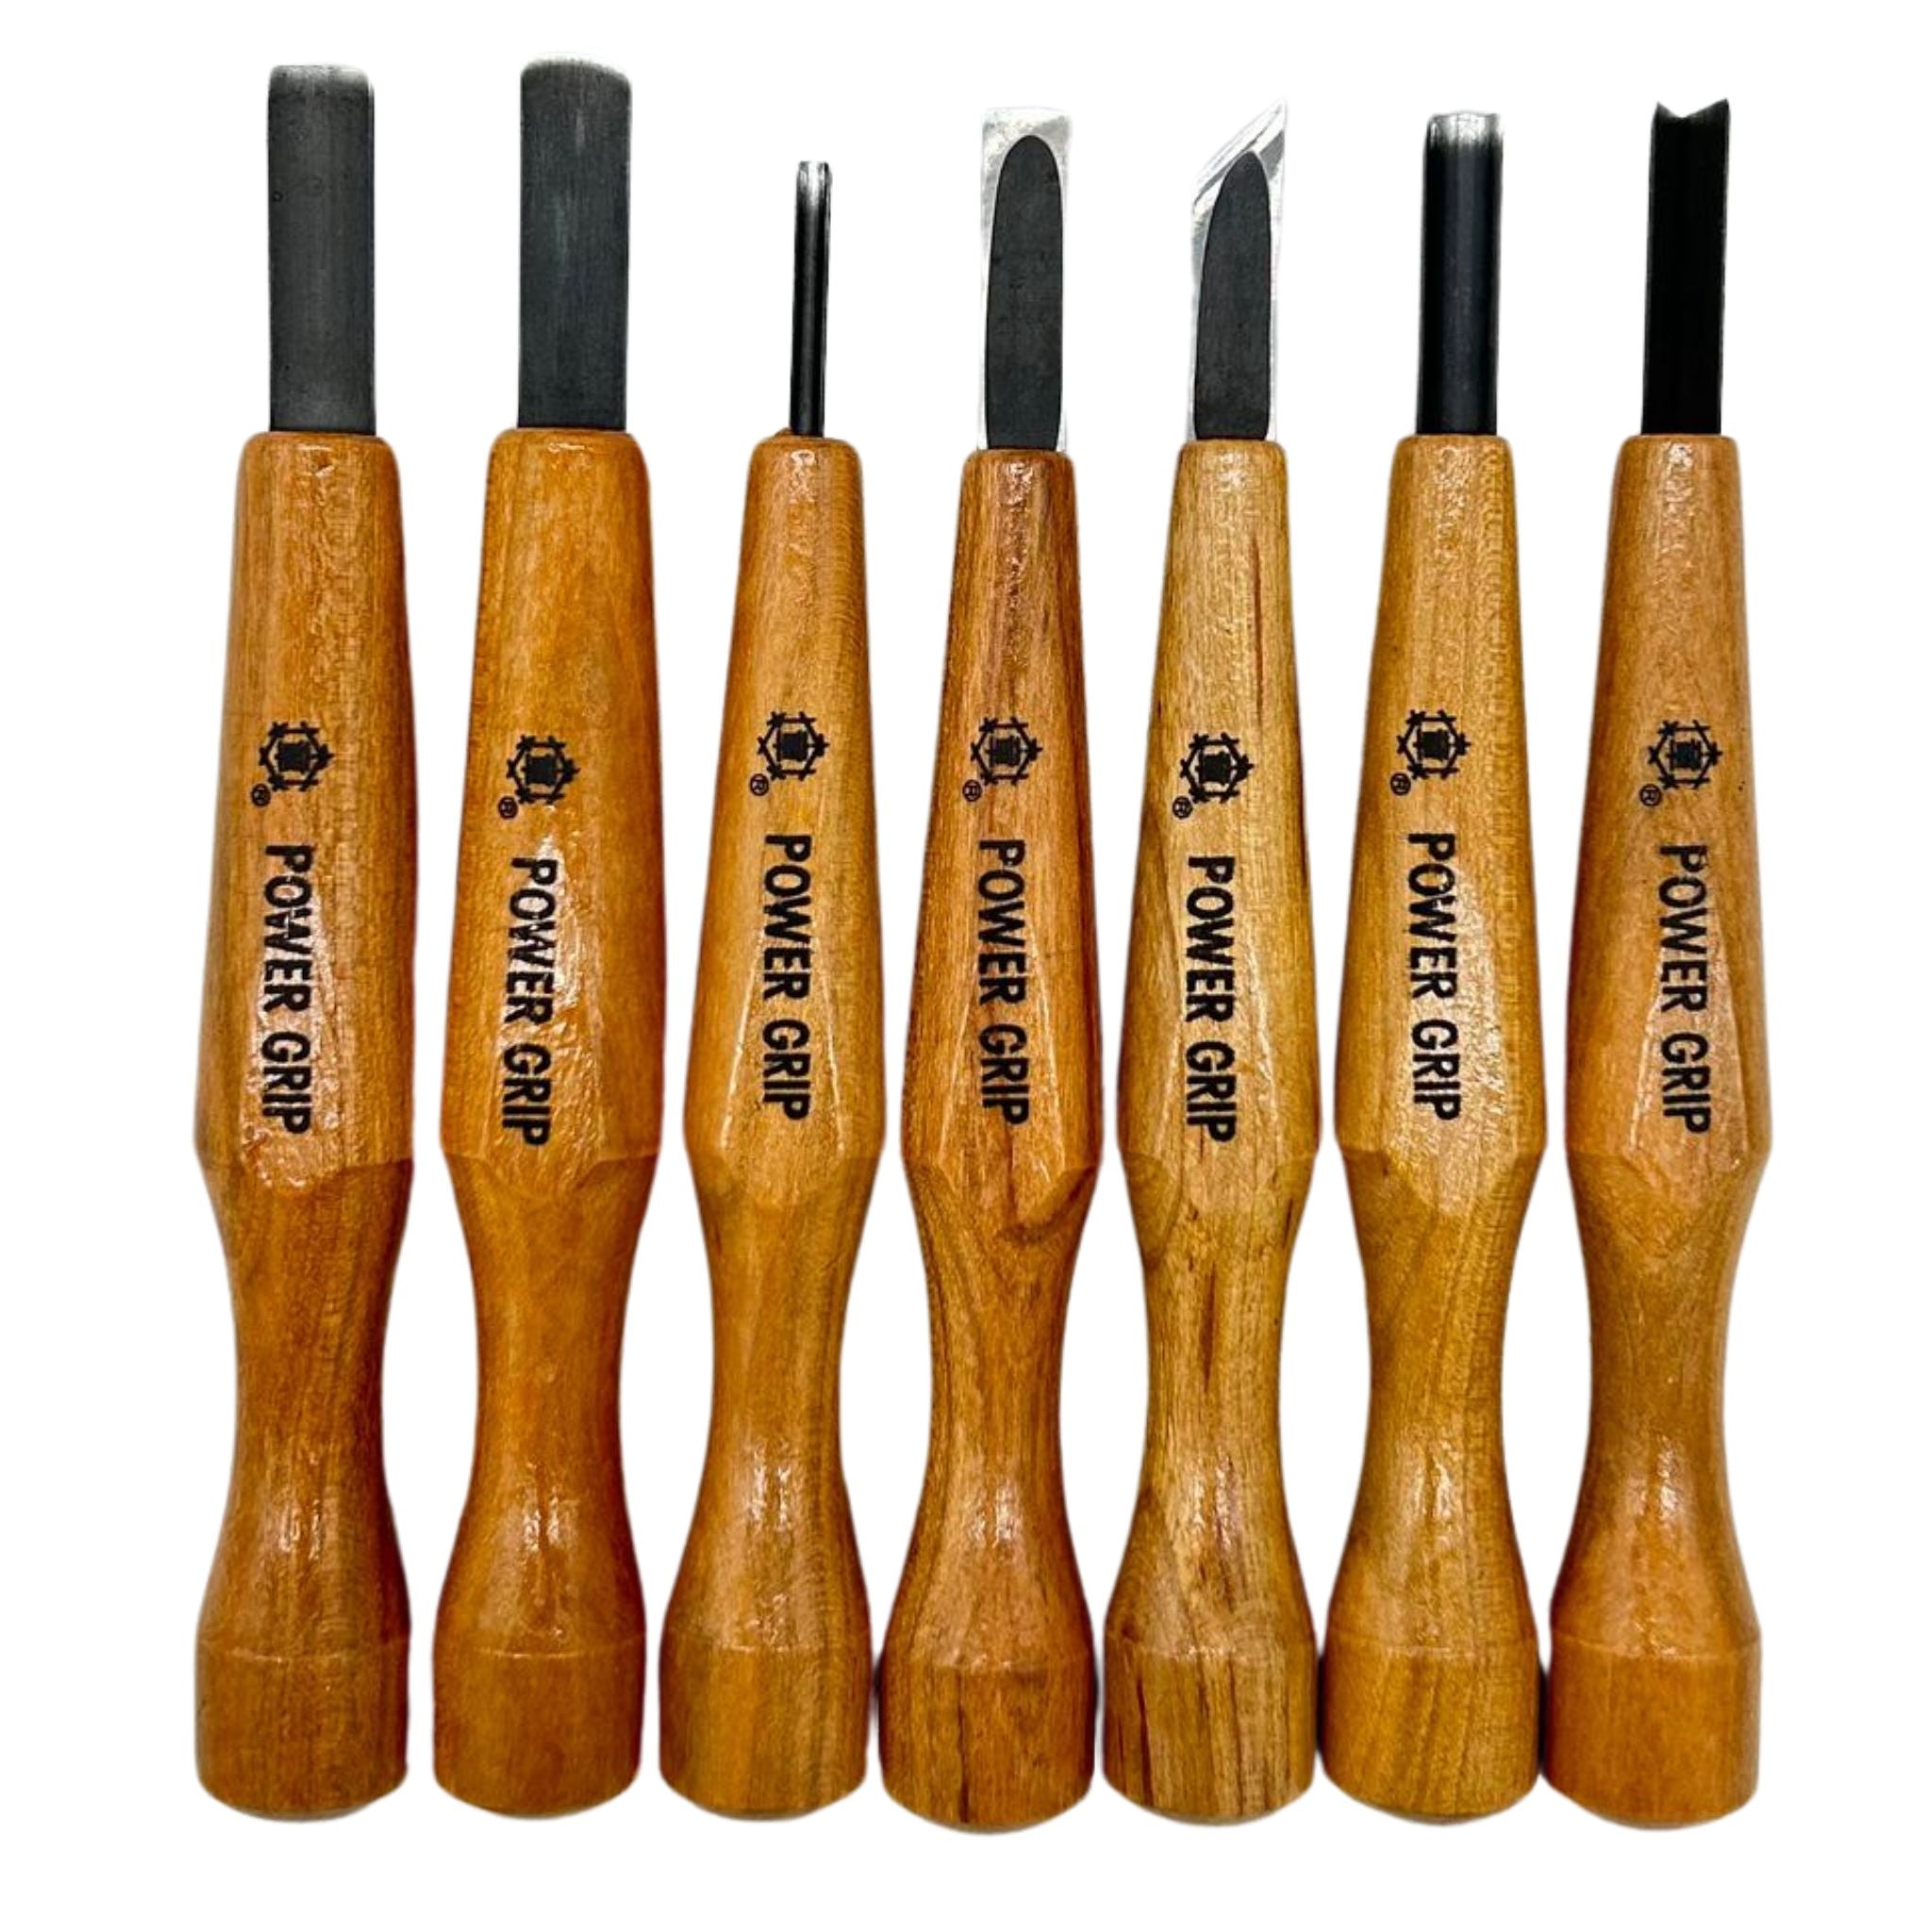 Mikisyo POWER GRIP Wood Carving Chisels & Gouges, 7 pieces Set, Made in Japan